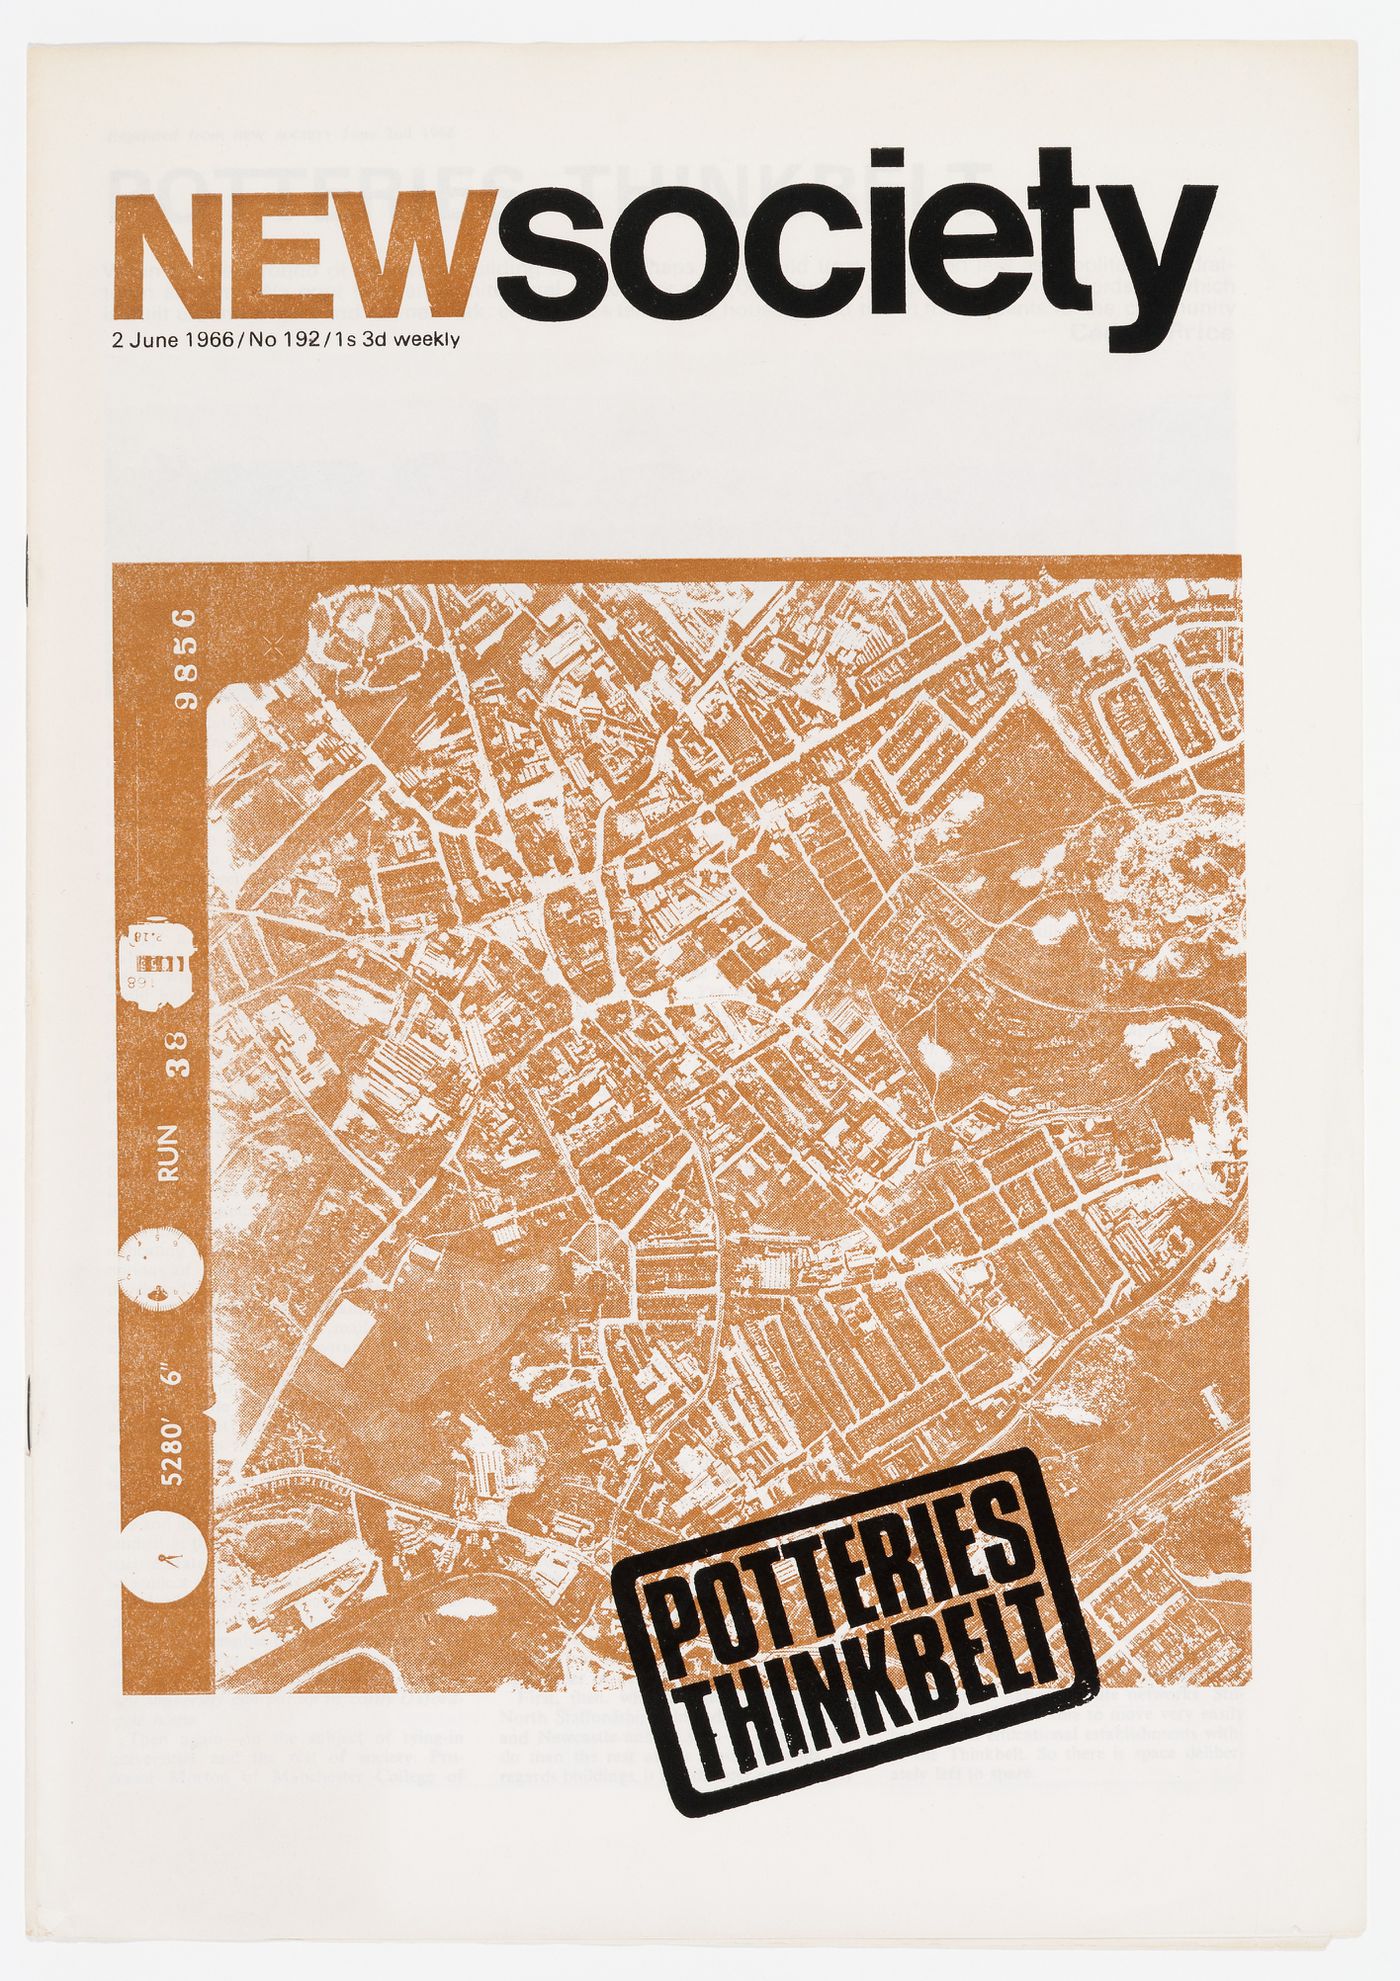 Reprint of the article "Potteries Thinkbelt" from no. 192 (2 June 1966) of the periodical New society